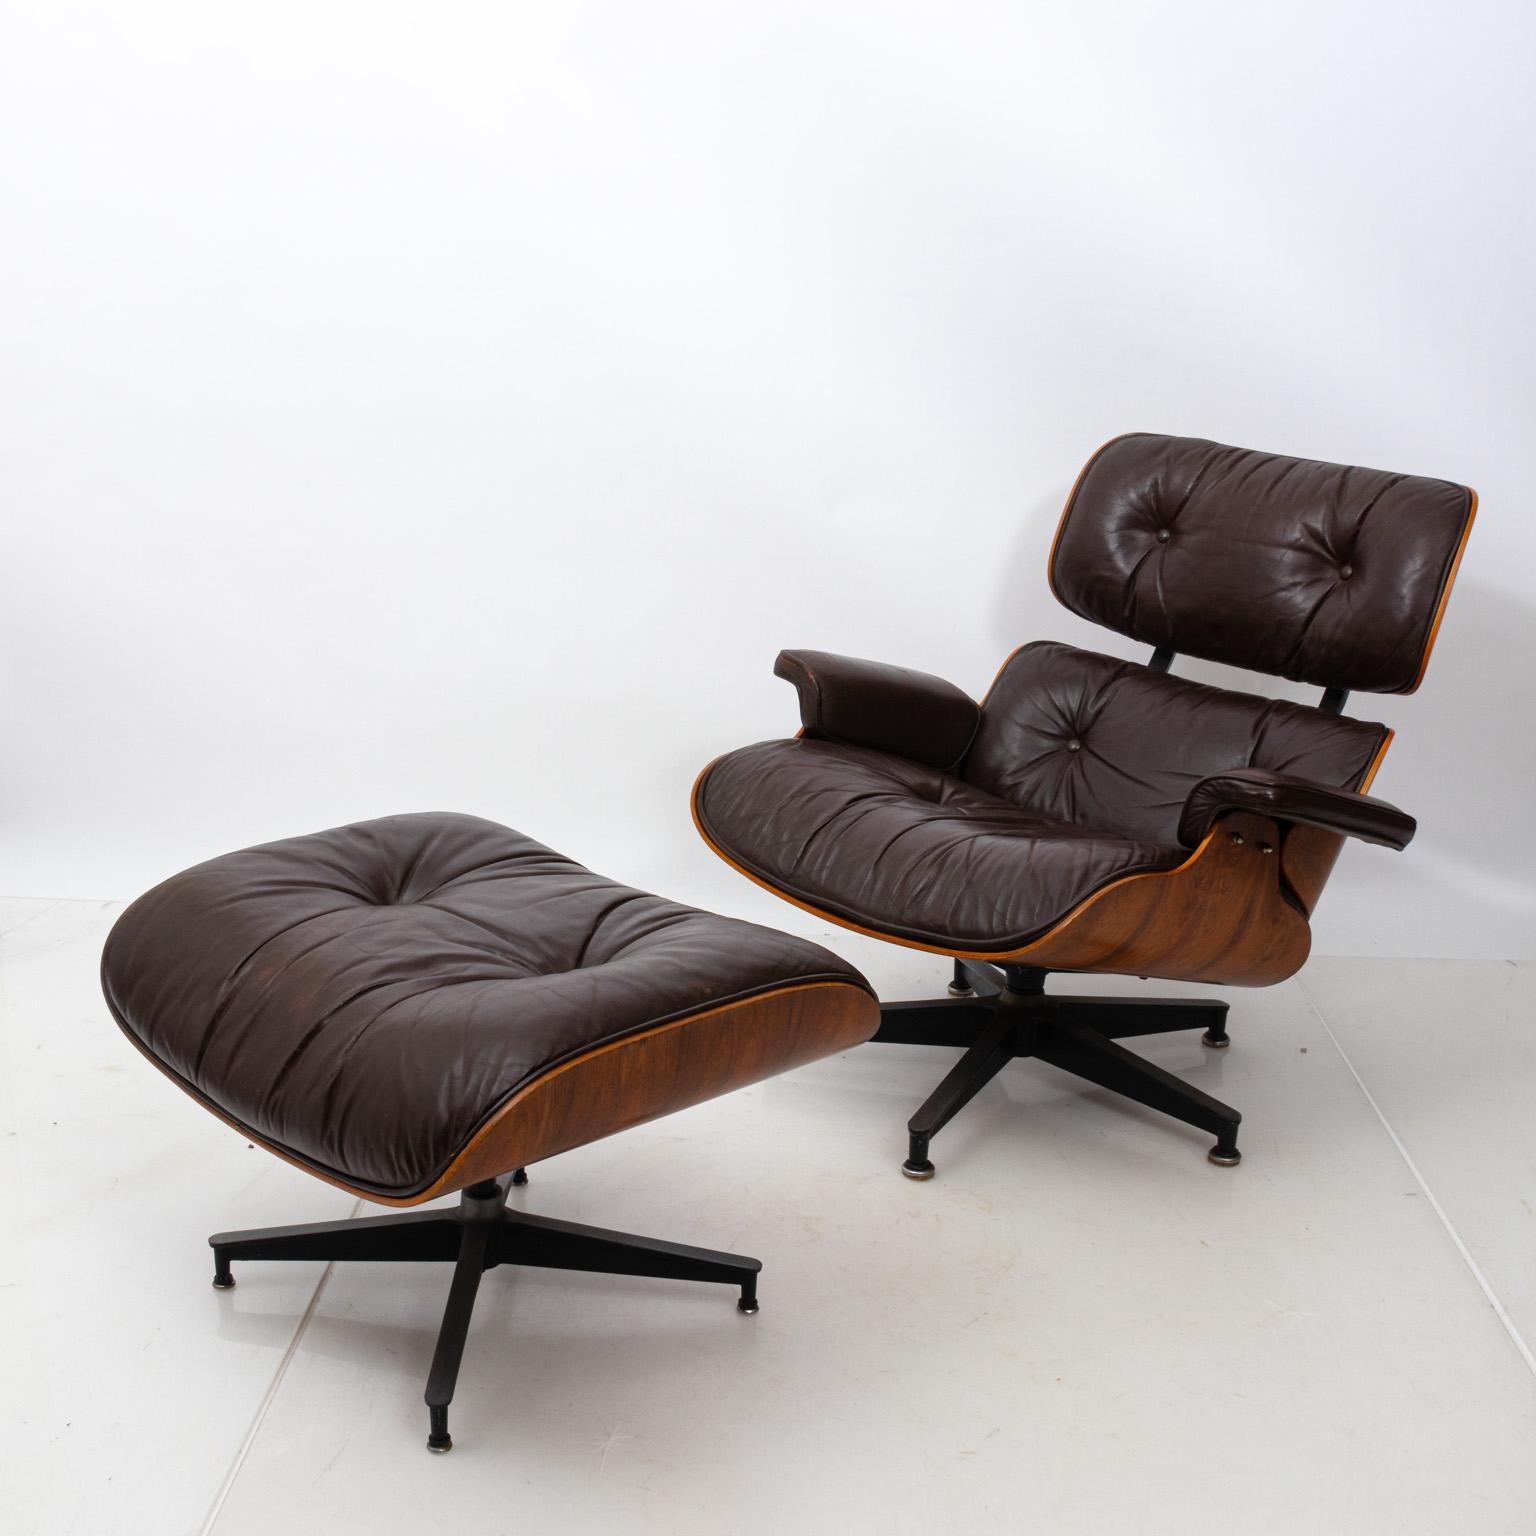 Late 20th Century Mid-Century Modern Eames Chair and Ottoman